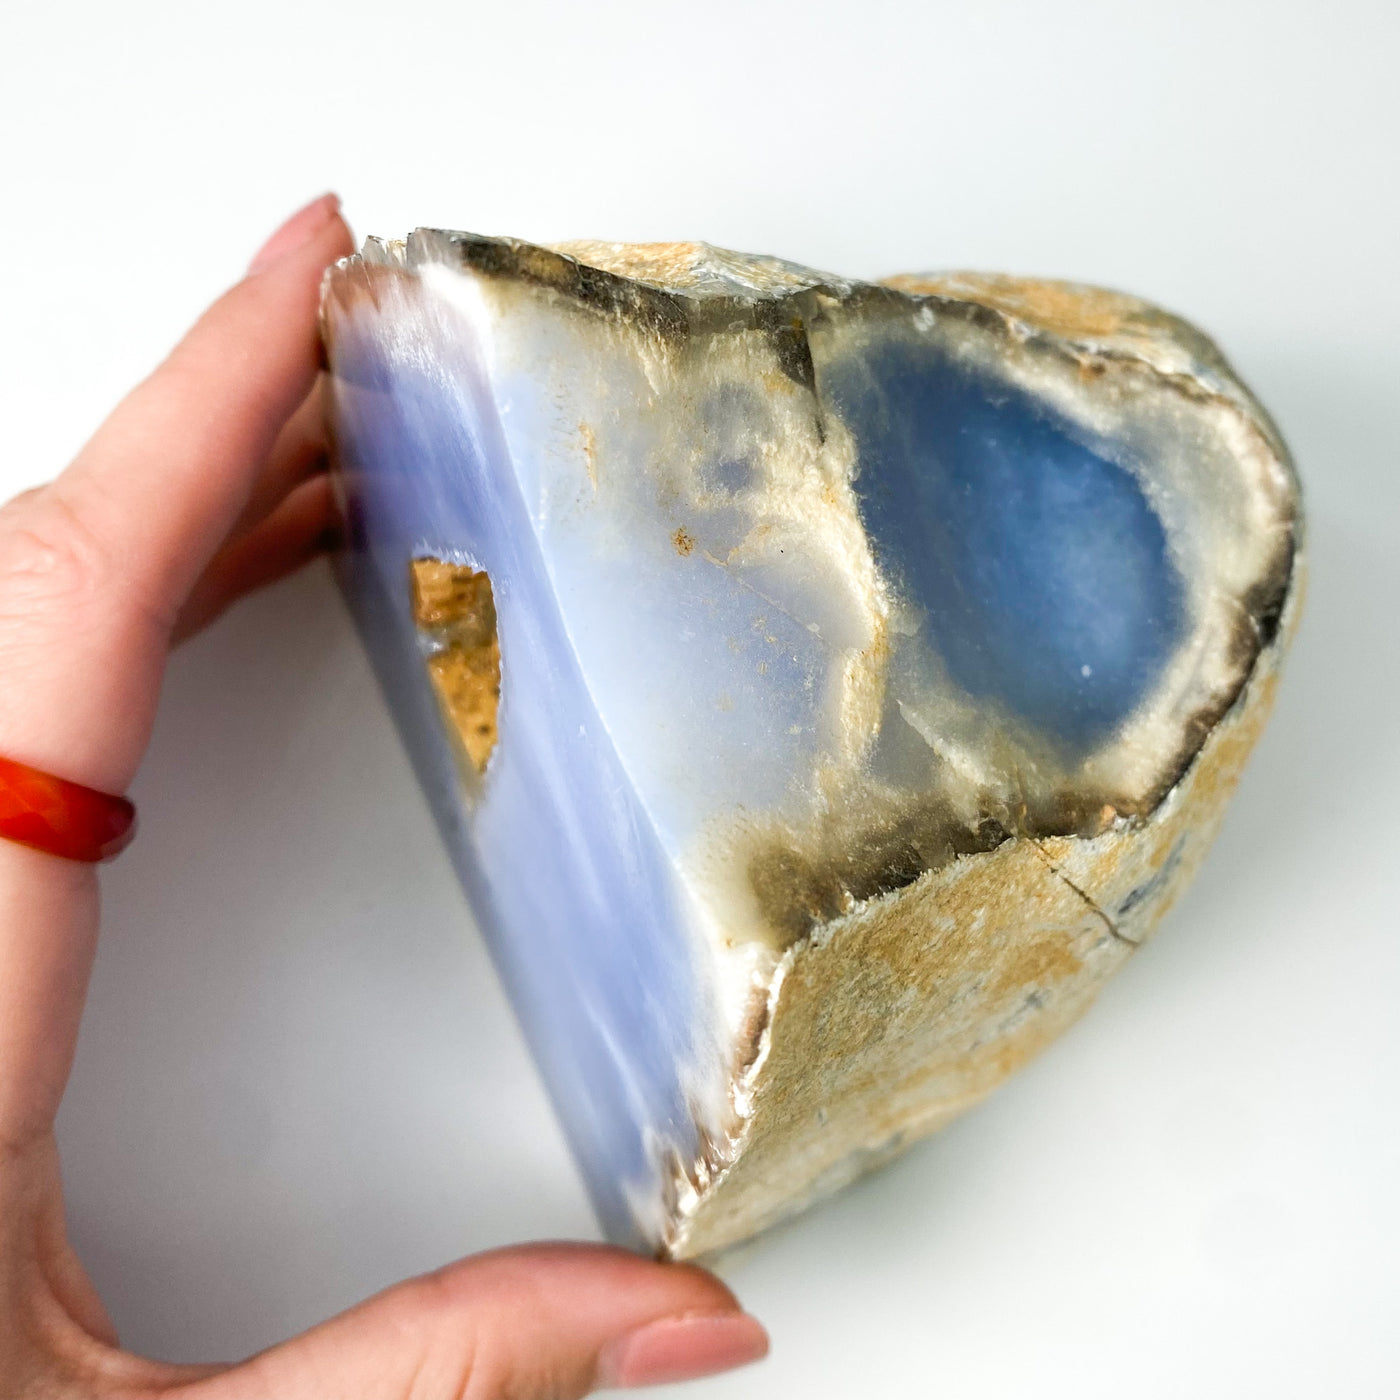 Blue Chalcedony geode with Desert Rose formation